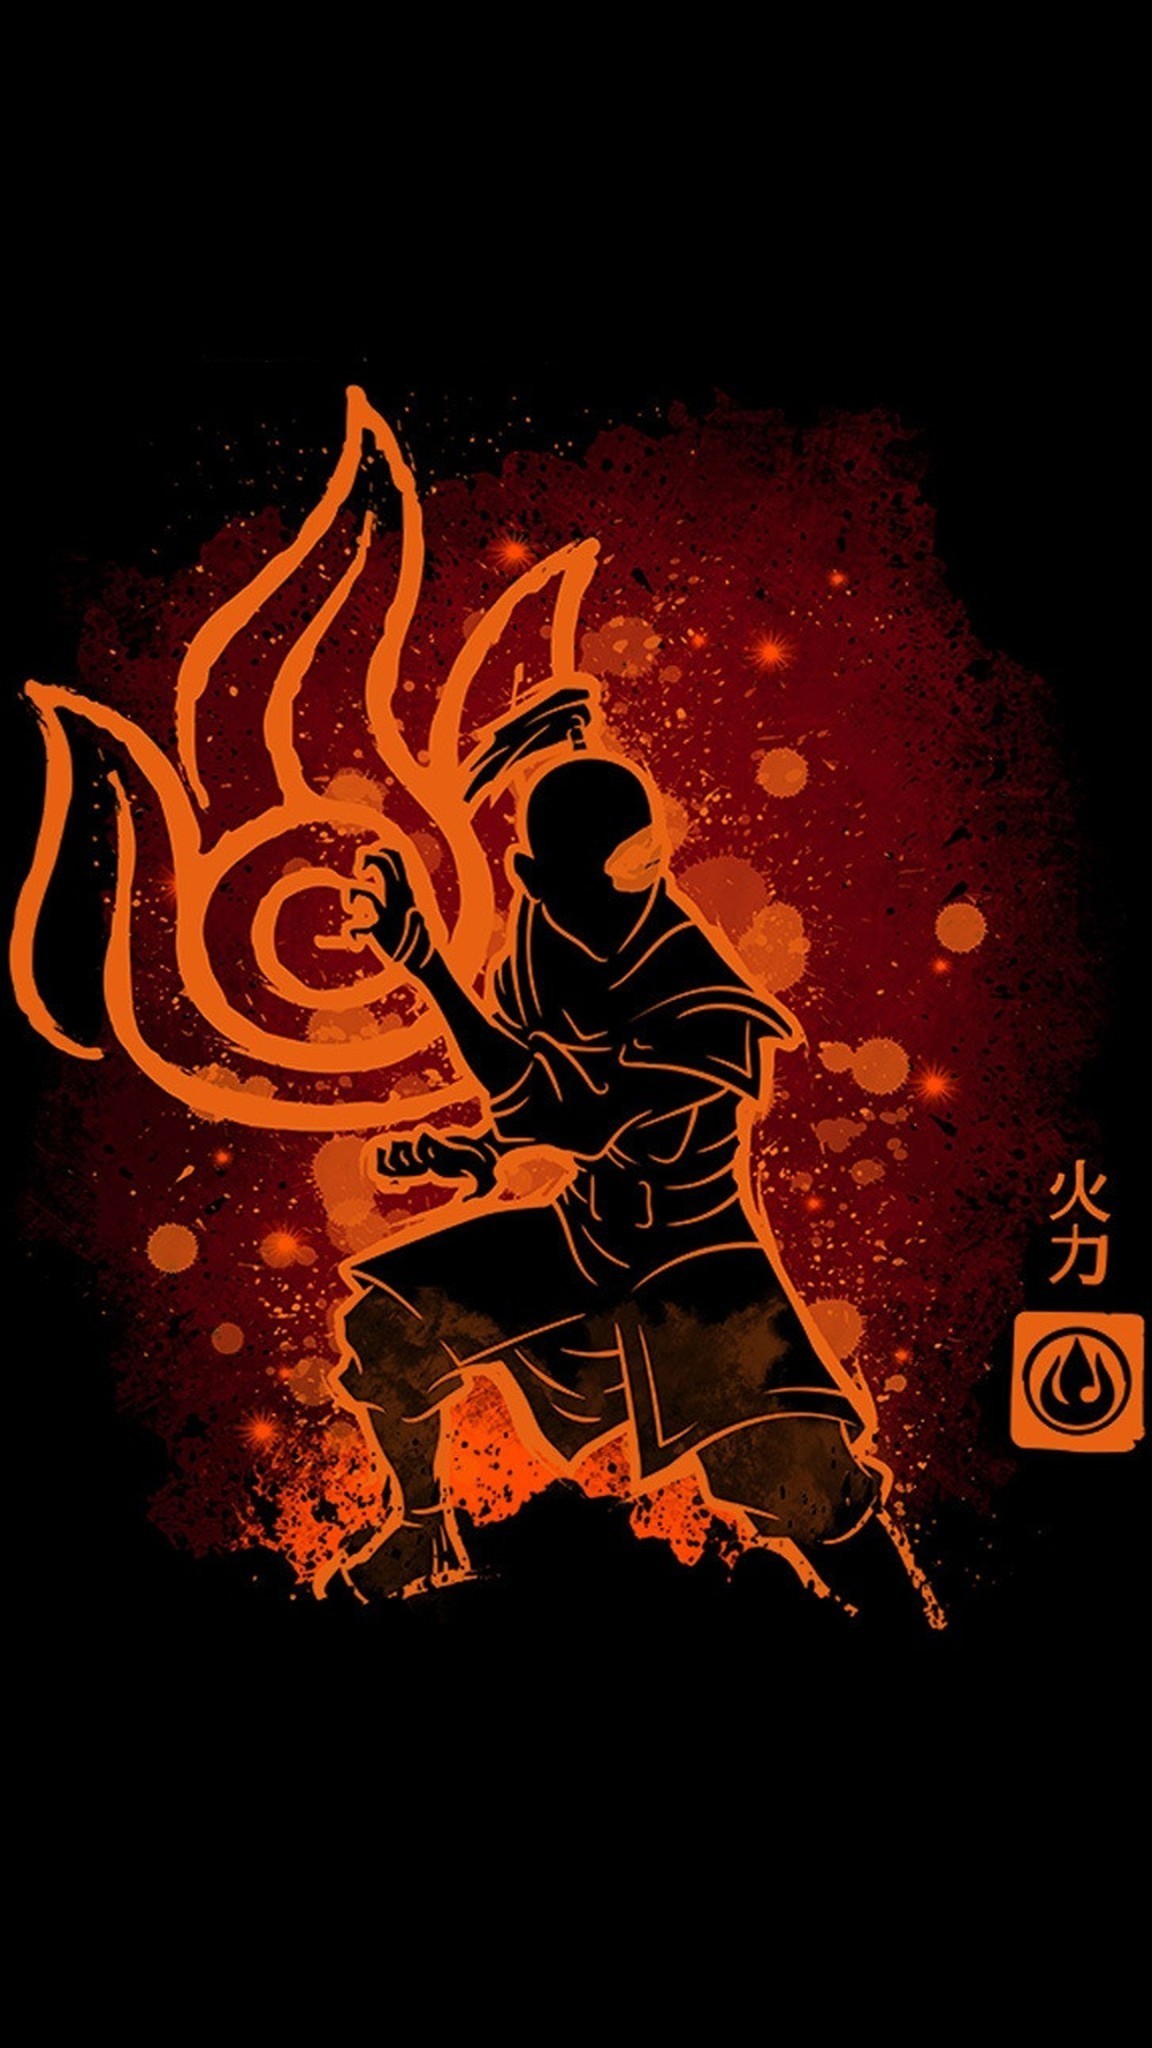 1152x2048 Zuko Avatar Mobile Wallpapers 0 Download Res 1920x1080 1152x2048